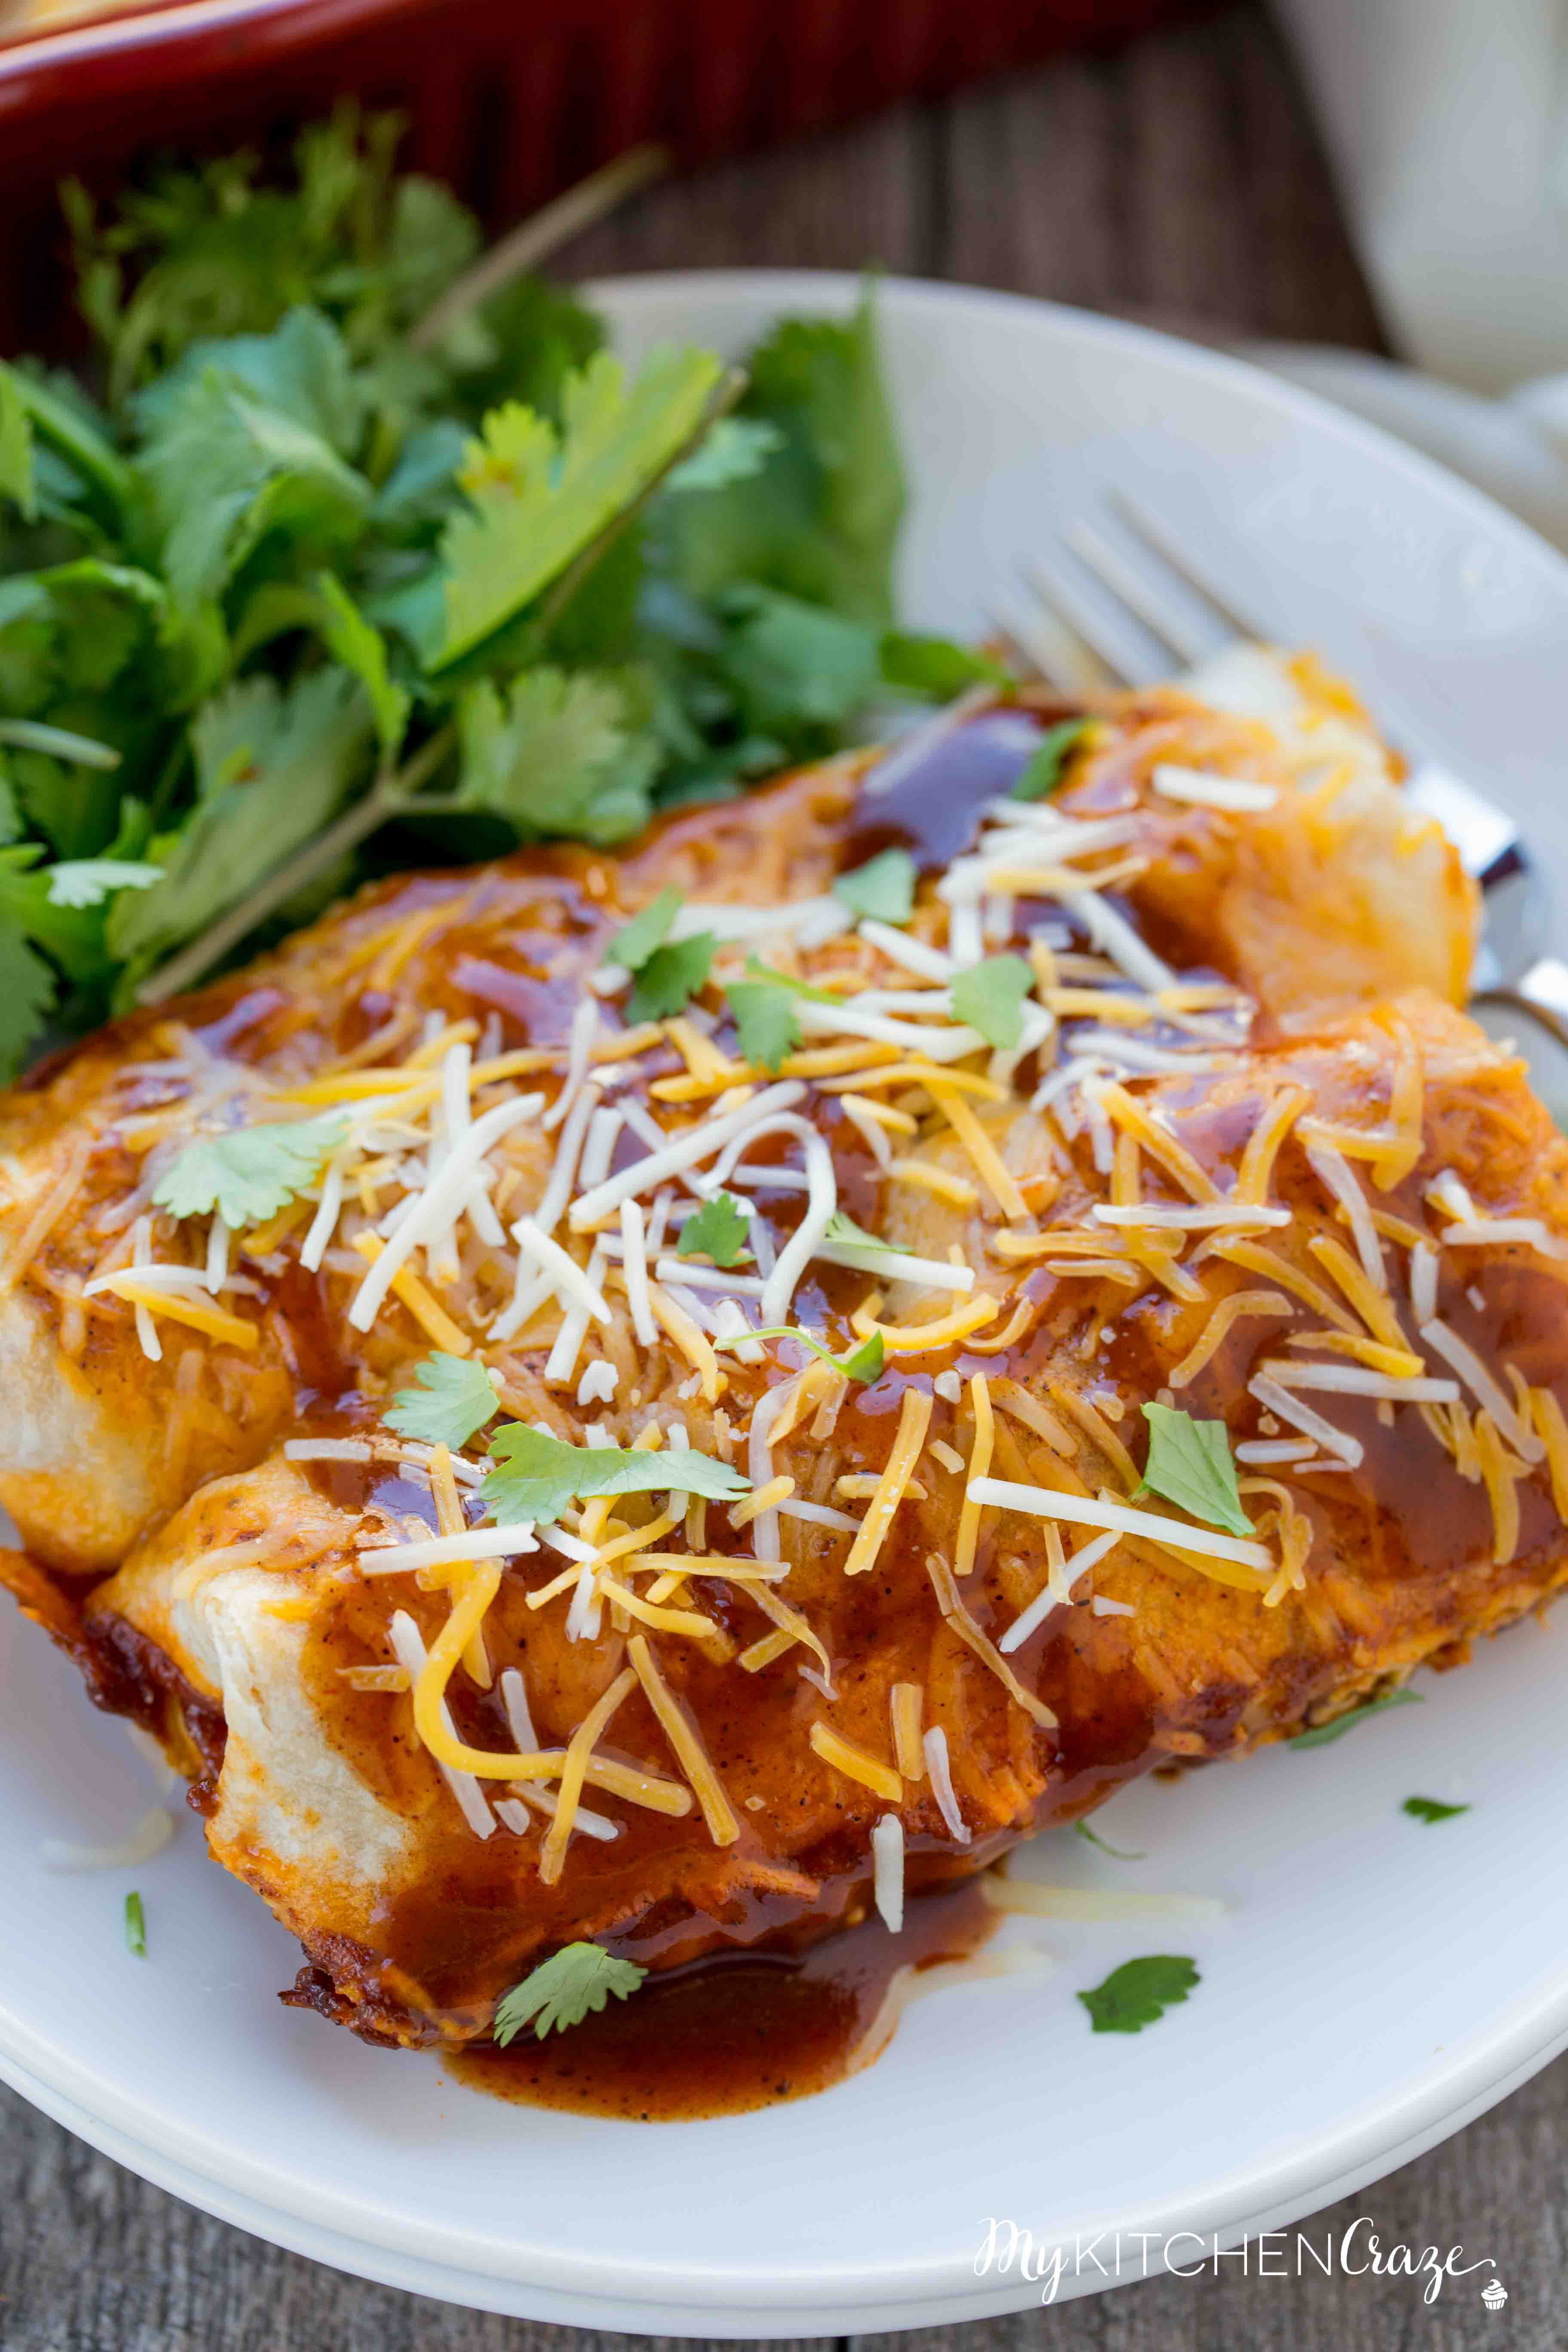 Beef & Potato Enchiladas ~ Loaded with delicious ground beef, crispy potatoes, vegetables then layered in a yummy enchilada sauce! The Perfect Weeknight Easy Dinner Recipe!